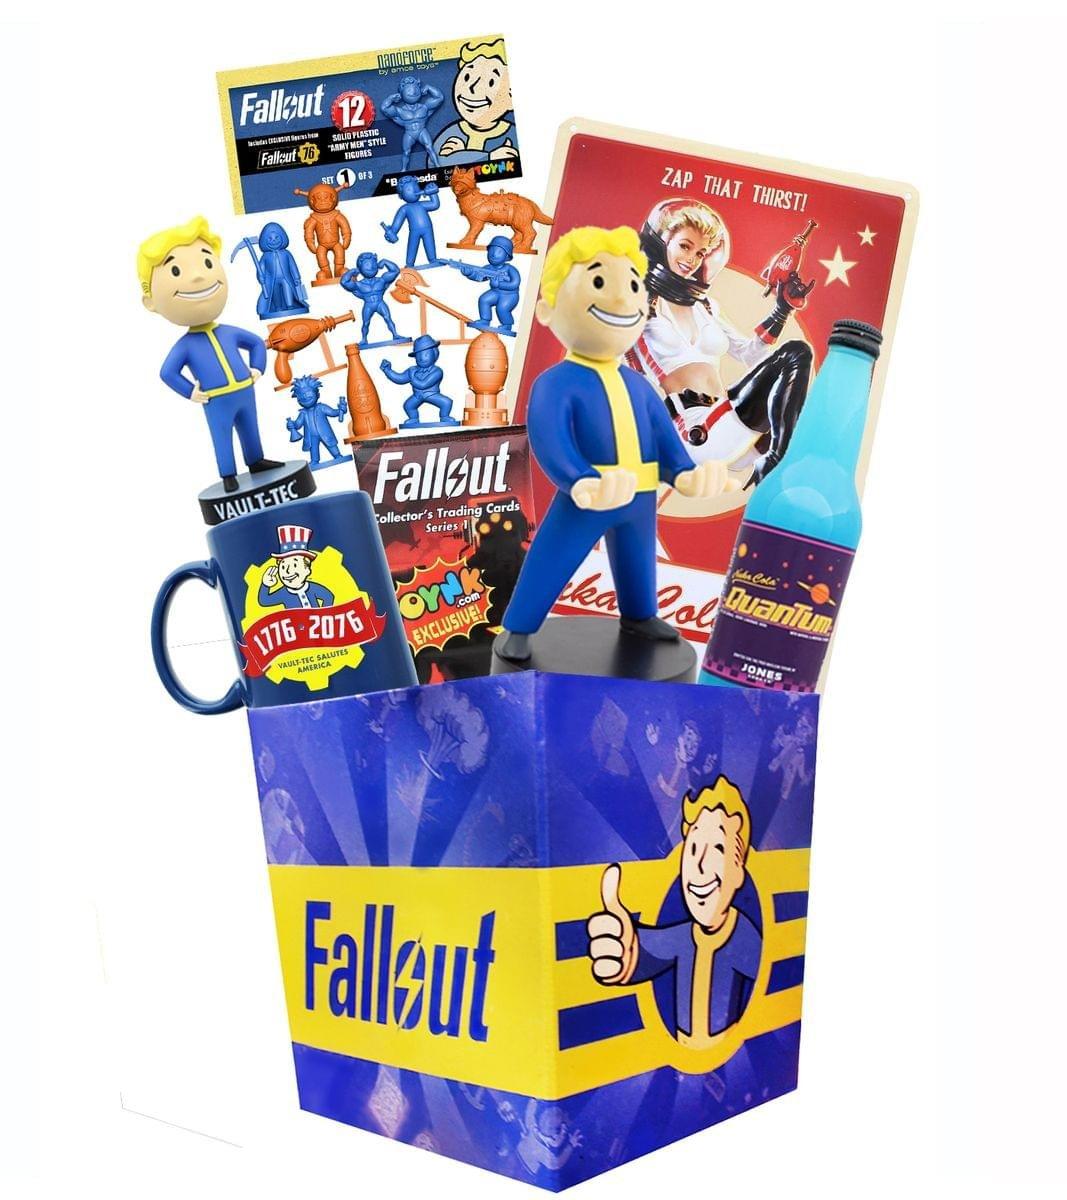 Toynk Fallout LookSee Box | GameStop